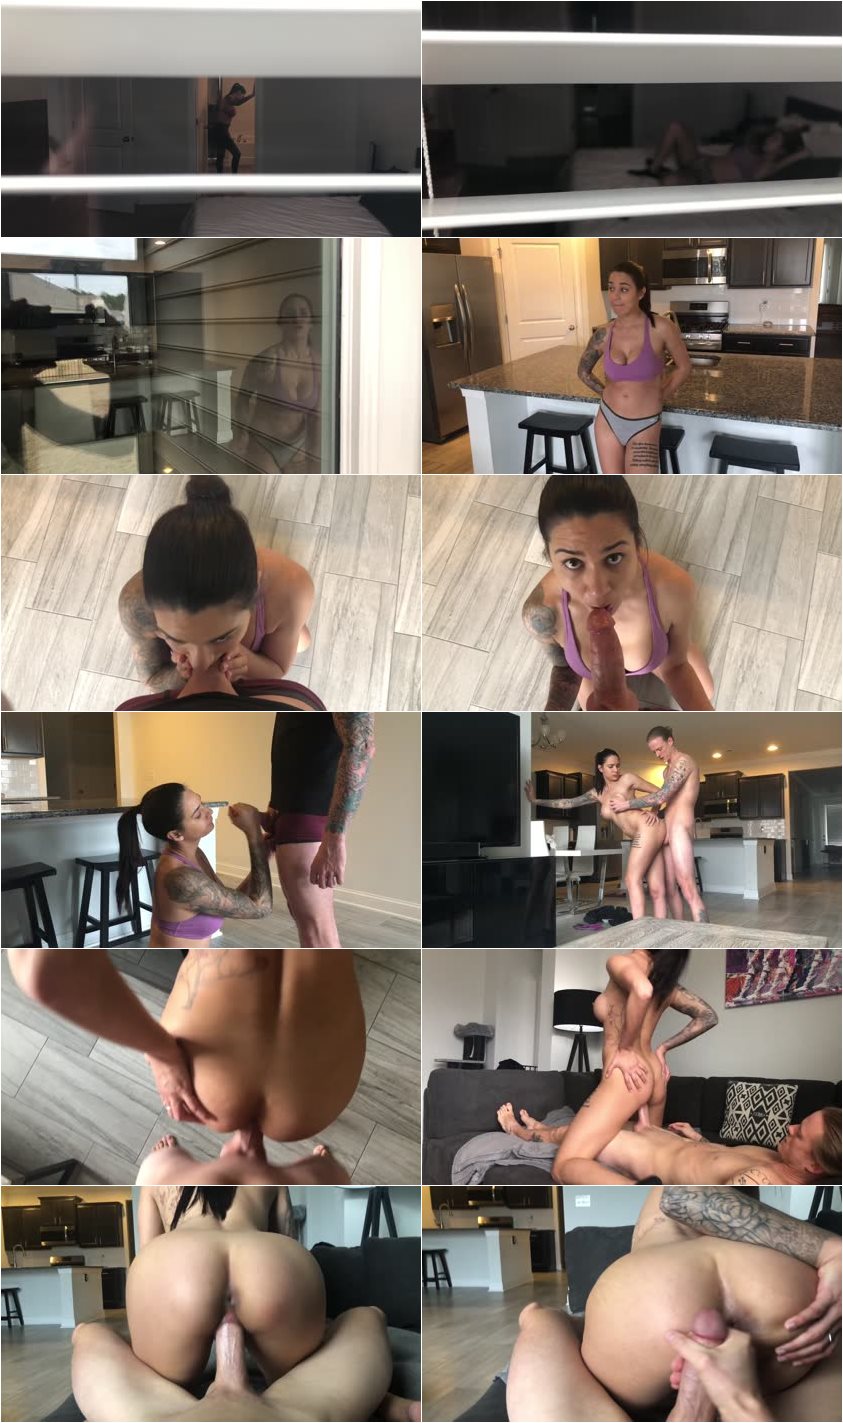 Spying Neighbor Gets Lucky Voyeur Fuck - Alexis Zara picture picture